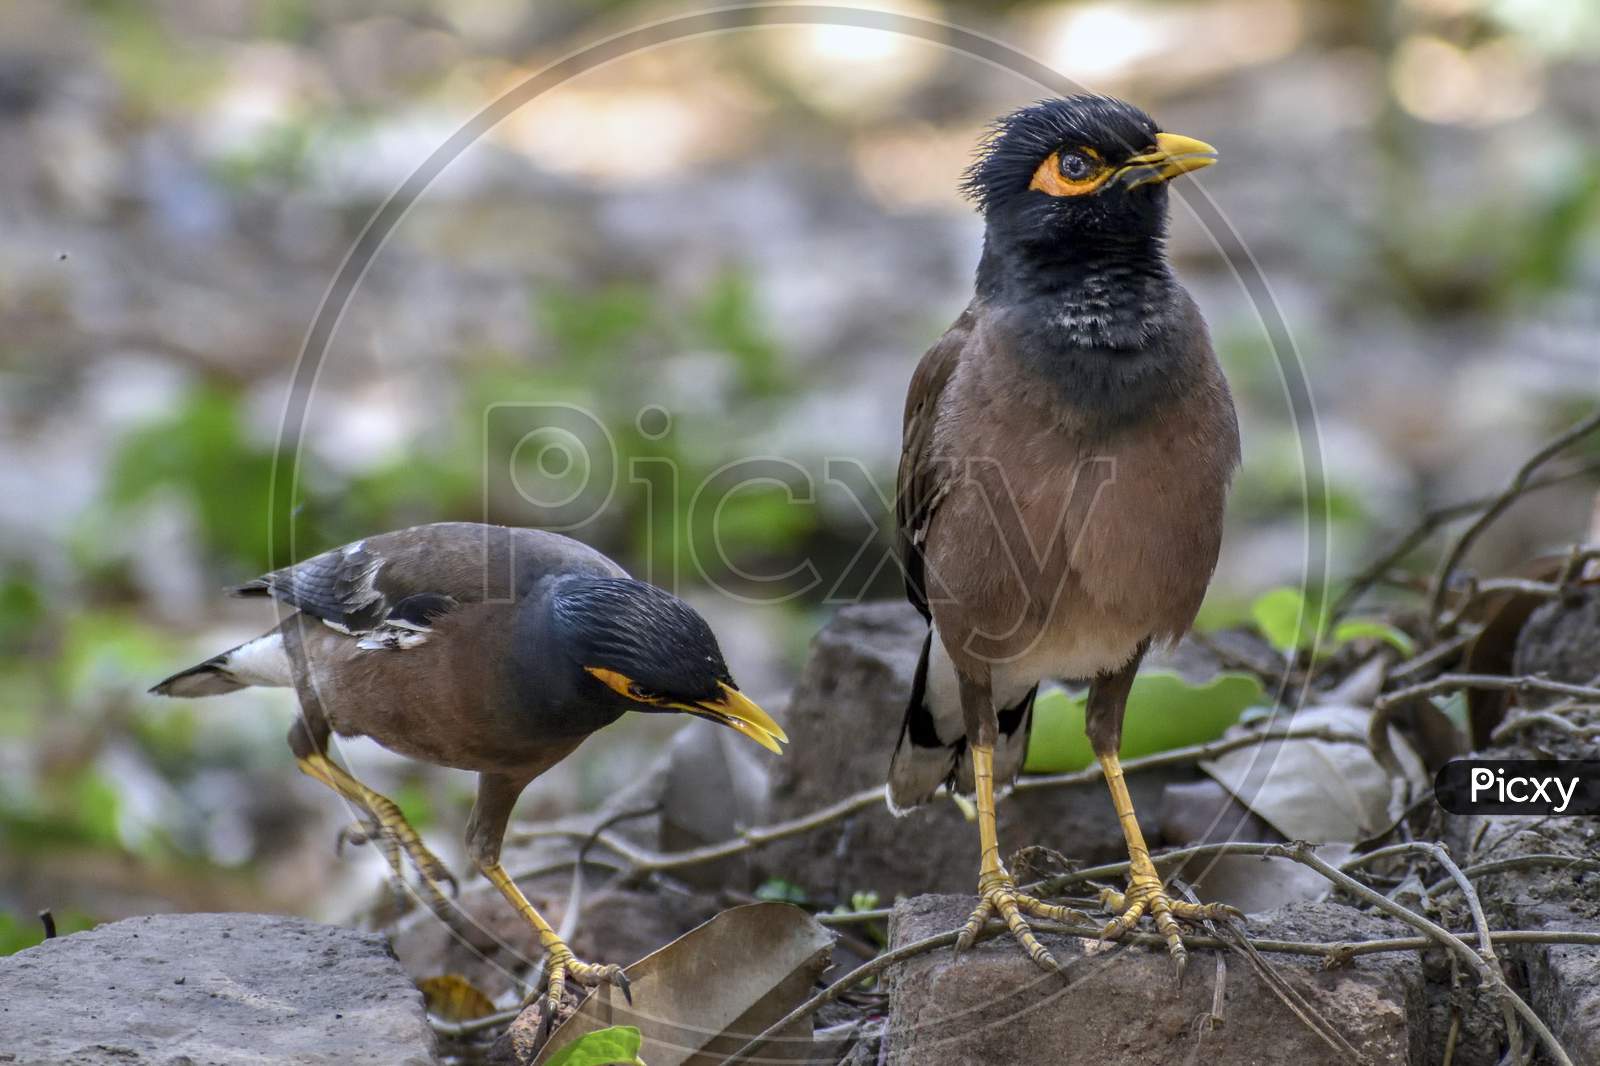 Common myna, Indian myna, is a member of the family Sturnidae